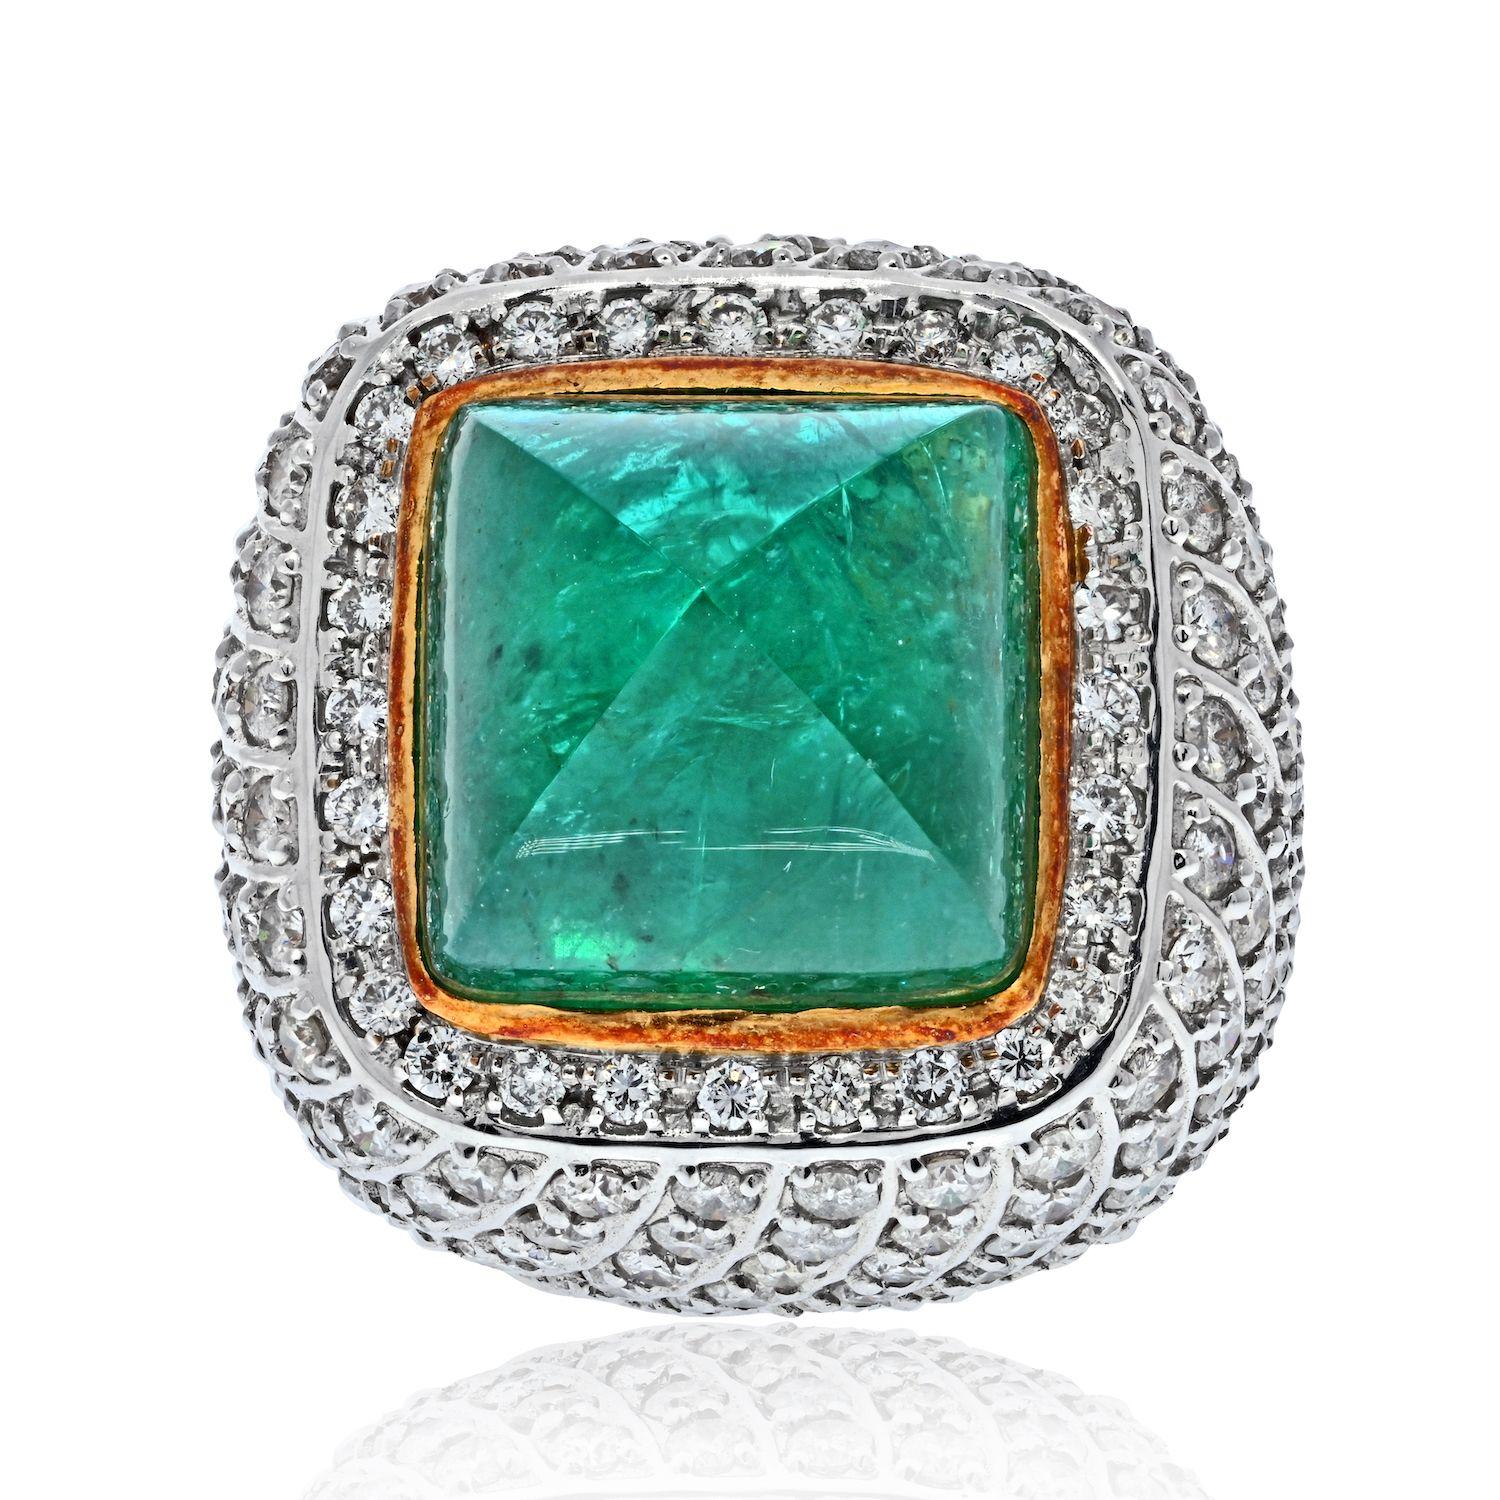 Make a statement with your favorite color: green. What is more impressive is the size of this green sugarloaf green emerald: a stunning 38 Carat stone is sure to turn heads. 
We love the lighter hue on the gem, but not too transparent. 
Pictures and